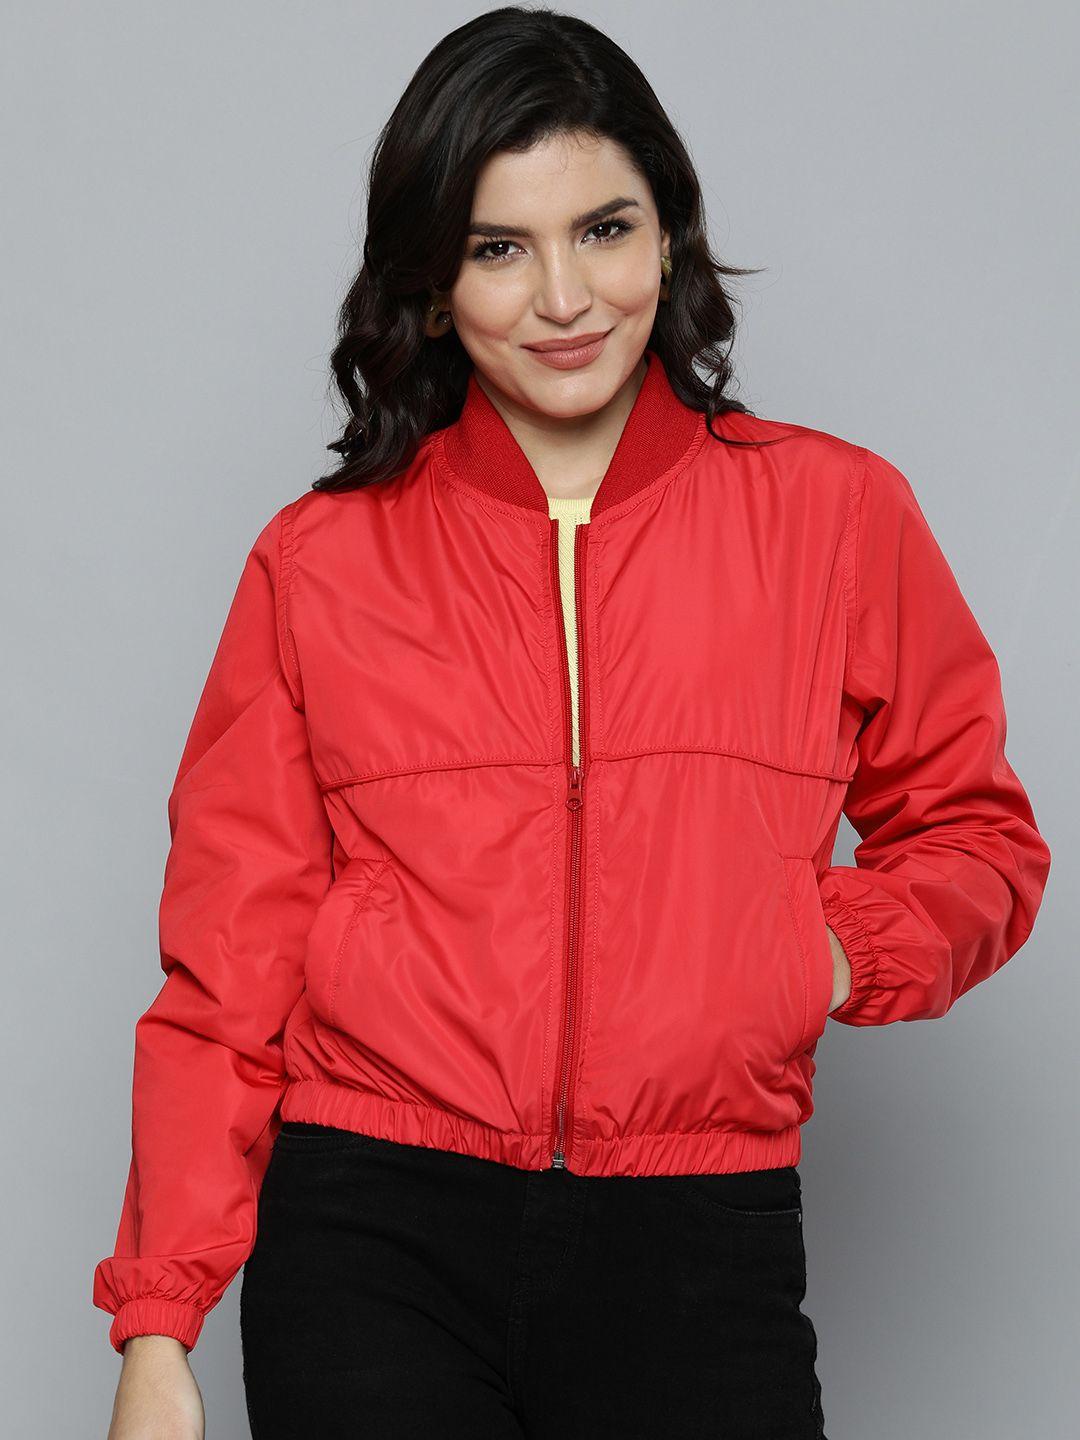 here&now-women-coral-red-solid-bomber-jacket